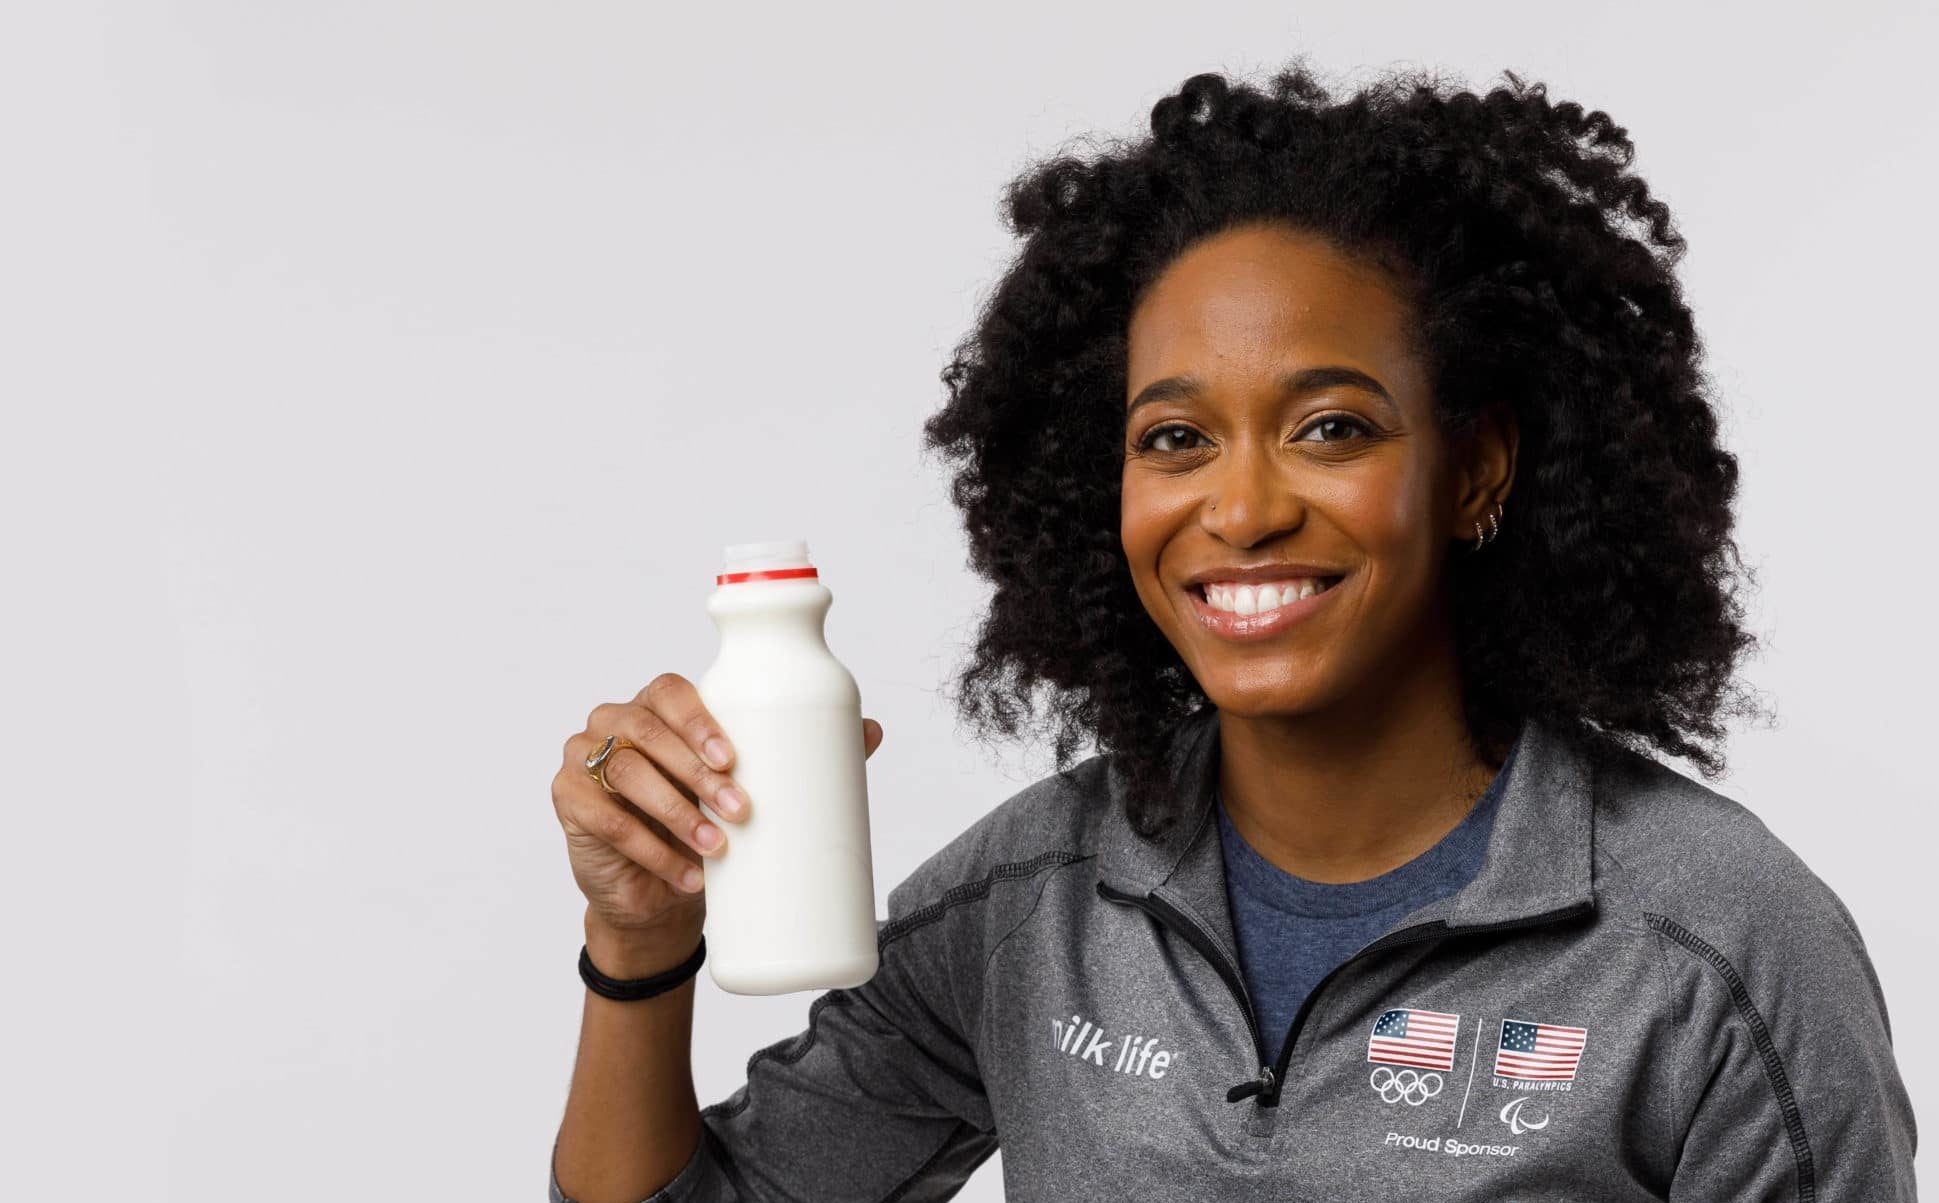 ‘Team Milk’ Member English Gardner Set to Compete in Relay Race in the Olympic Games